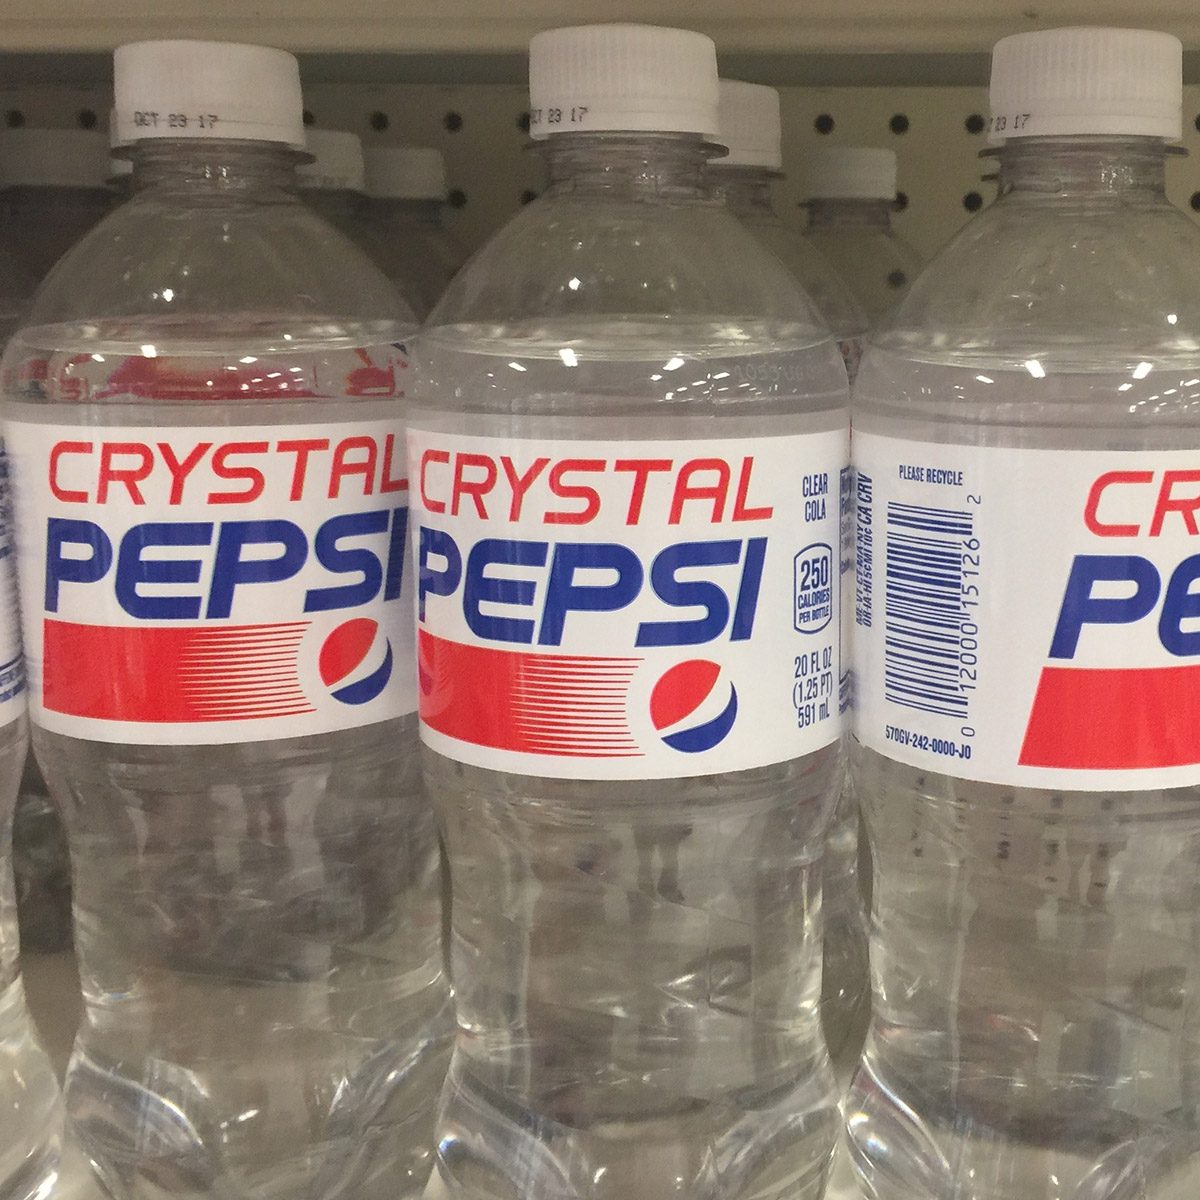 SEPTEMBER 25 2017 - MINNEAPOLIS, MN: Crystal Pepsi plastic soda bottles on the store shelves for sale. This soda flavor was originally sold in the early 1990s, and brought back for nostalgia ; Shutterstock ID 721834738